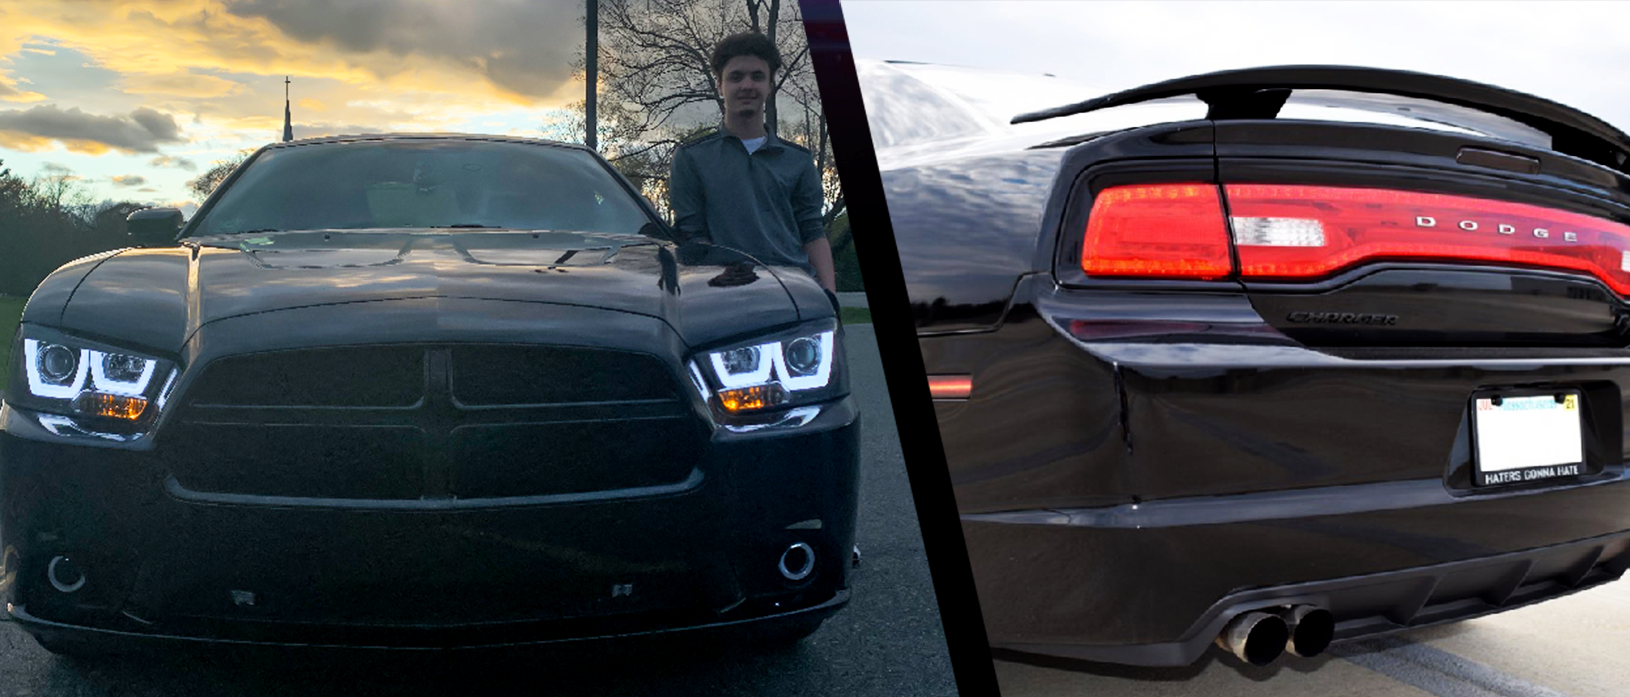 seth and his 2011 dodge charger r/t